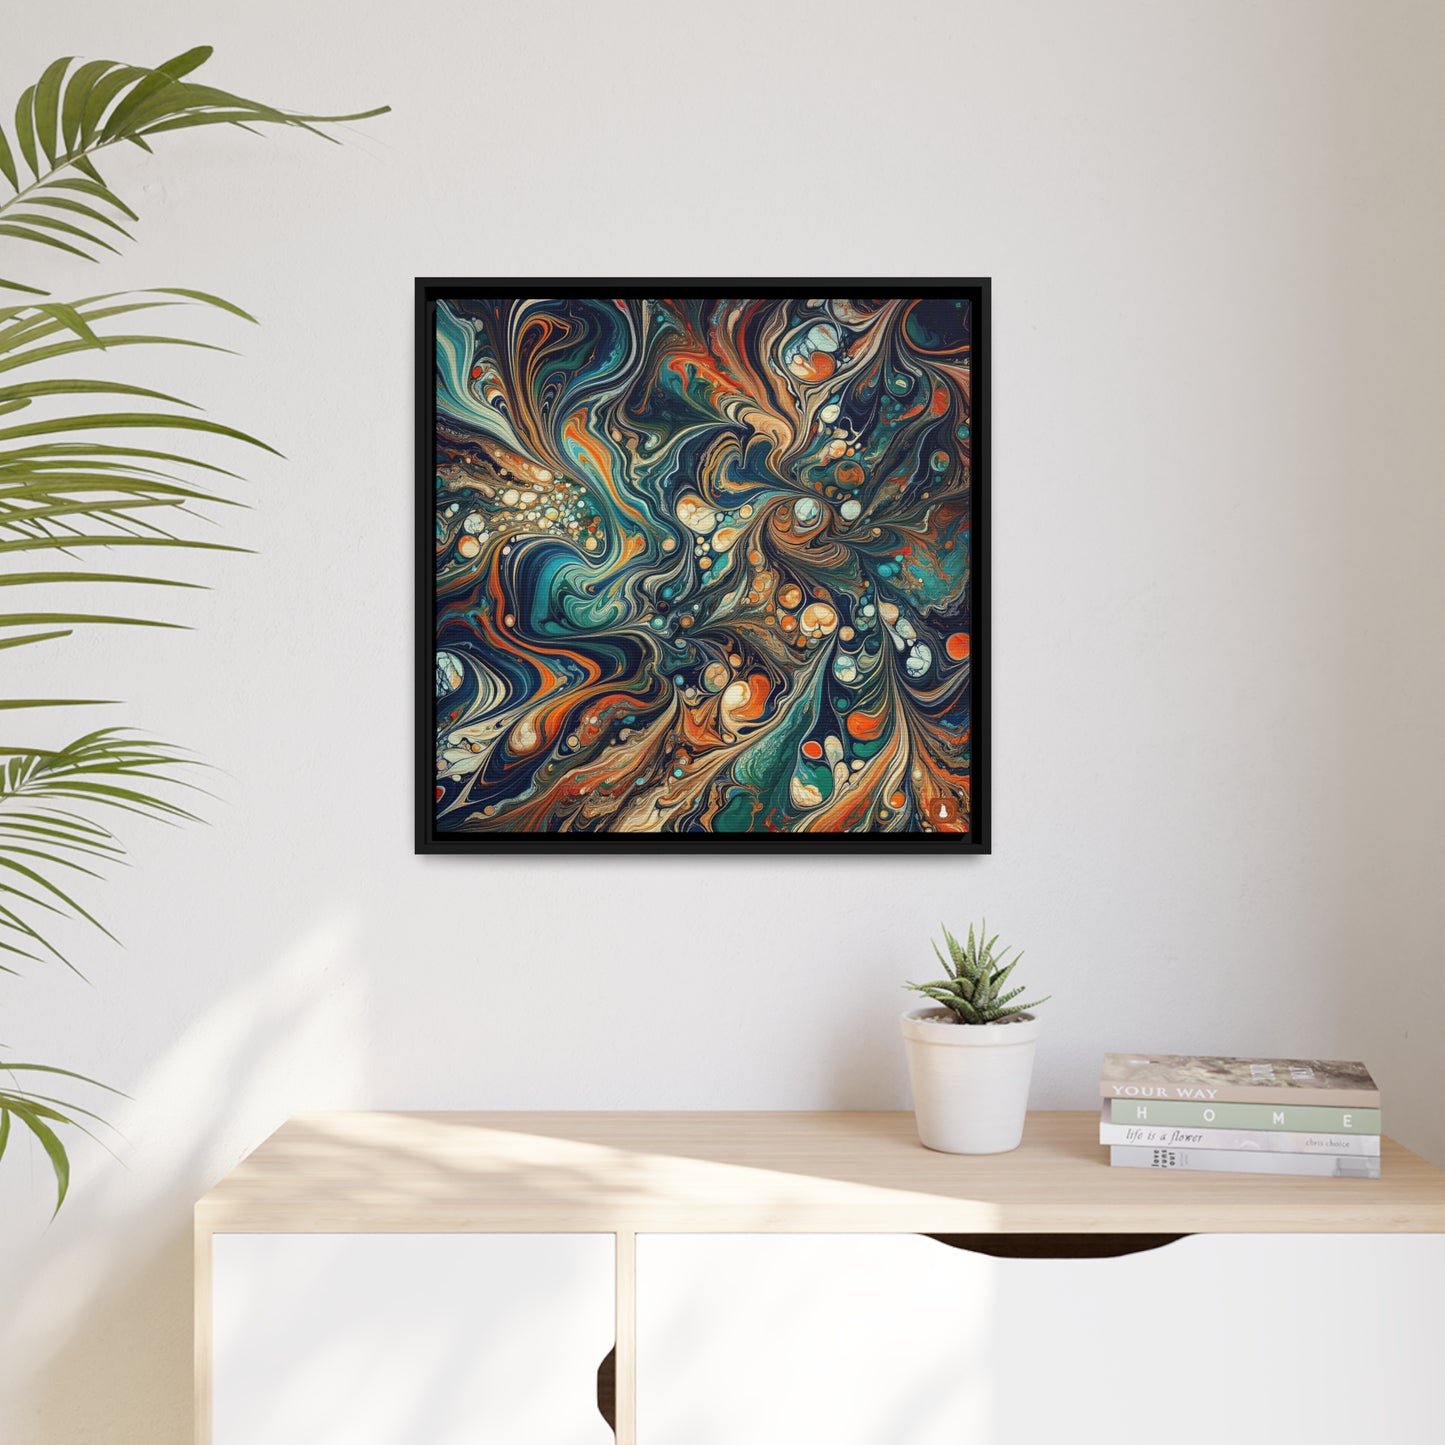 Ocean and Shells | Digital Abstract Work of Art | FRAMED CANVAS WRAP